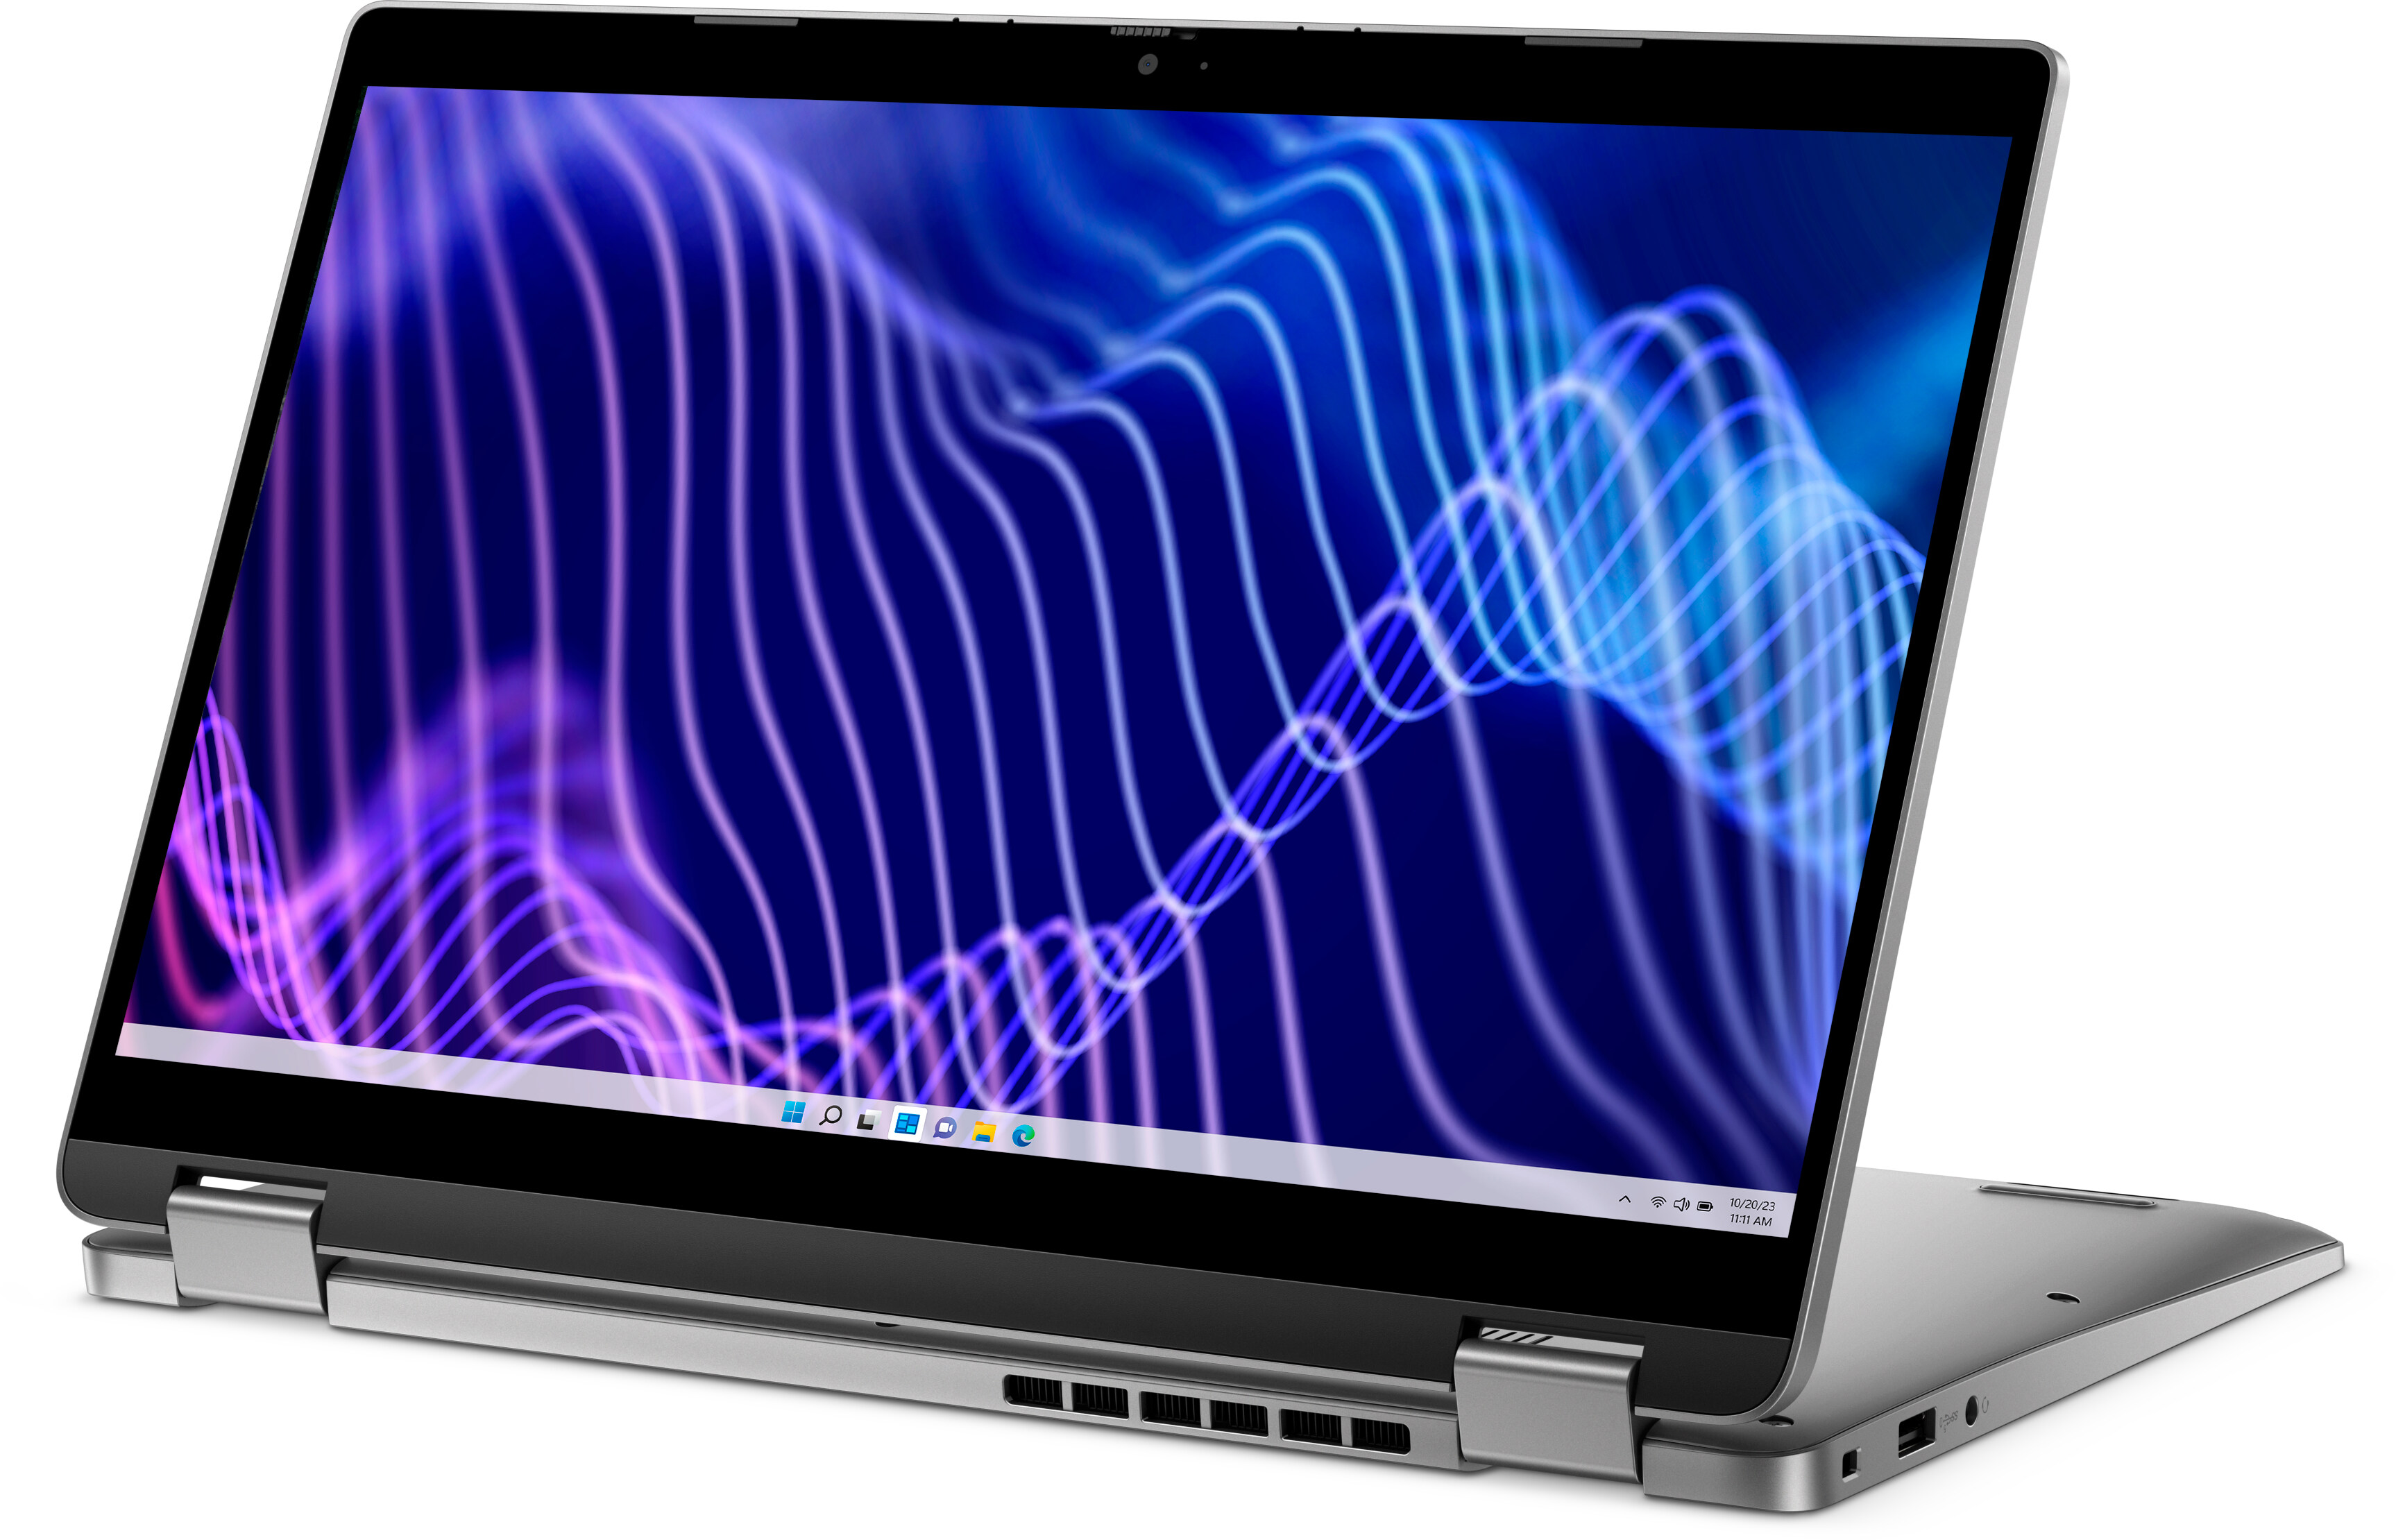 Dell Latitude 13 inch 2-in-1 laptop with USB Type-C Thunderbolt 4